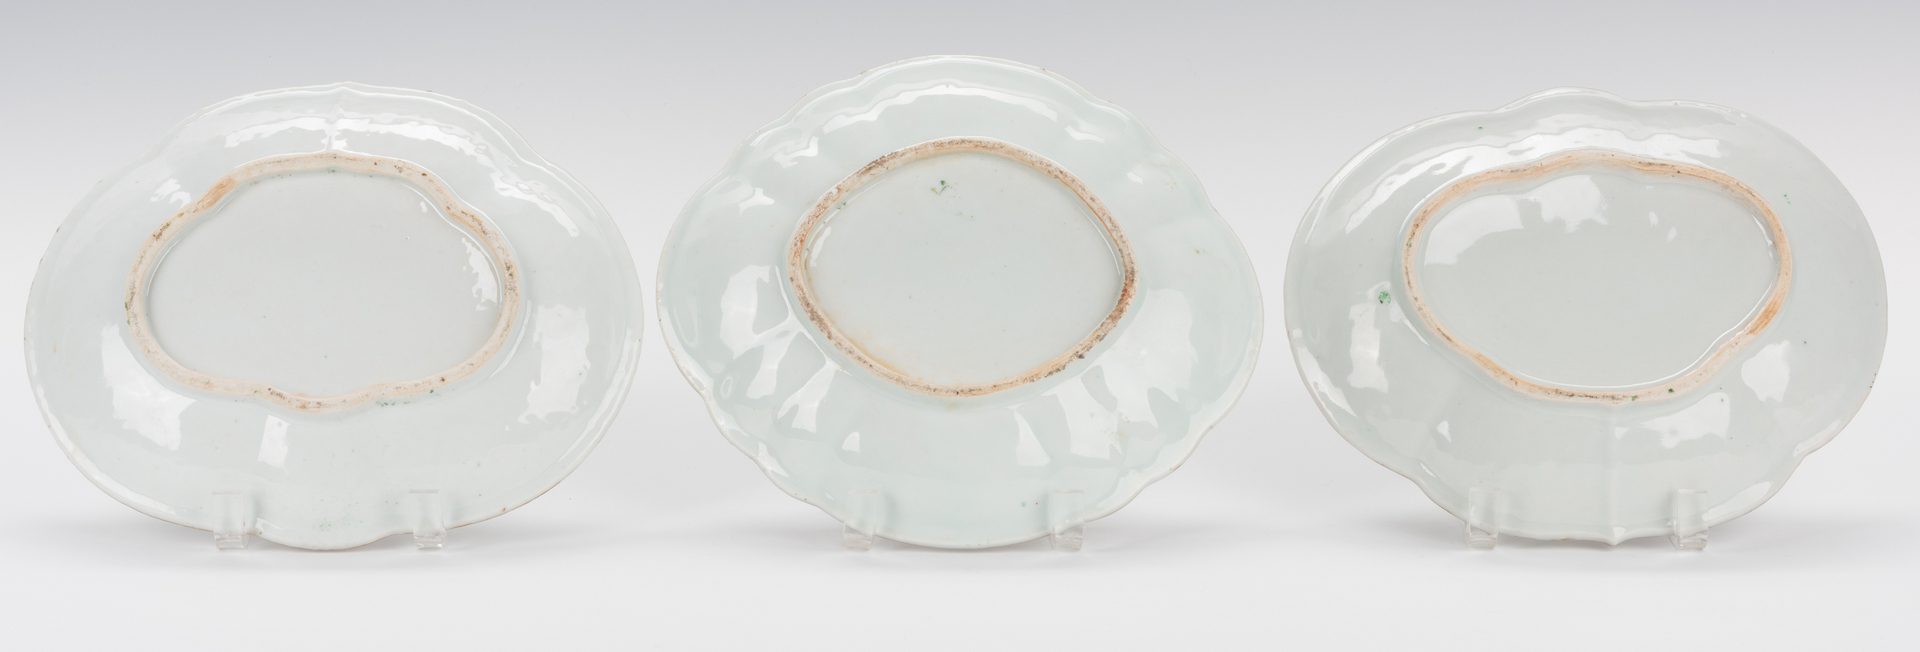 Lot 355: 3 Chinese Rose Medallion Porcelain Dishes, Oval shapes